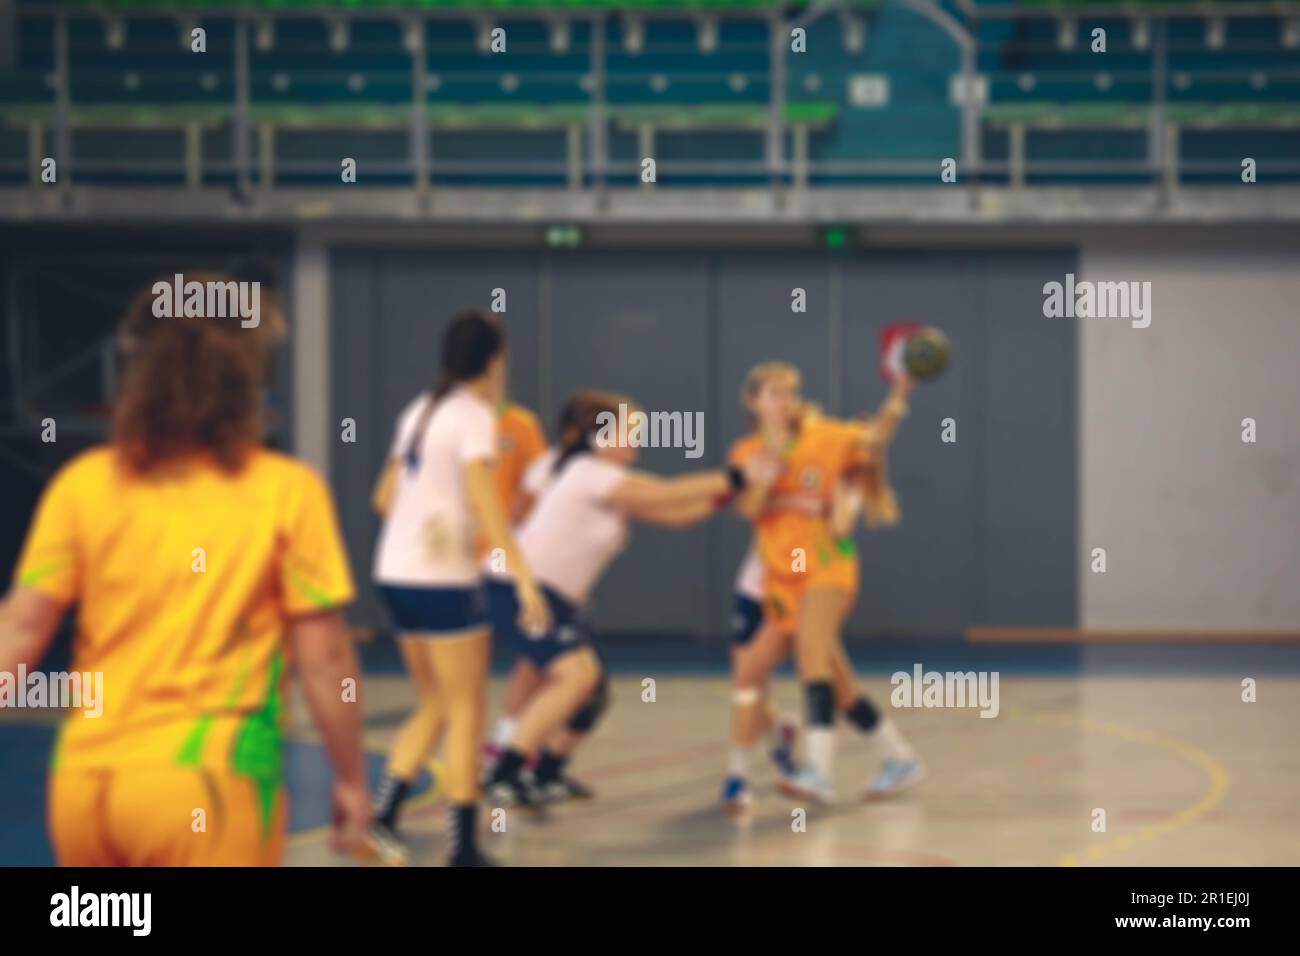 Blurred image of women handball players in action Stock Photo